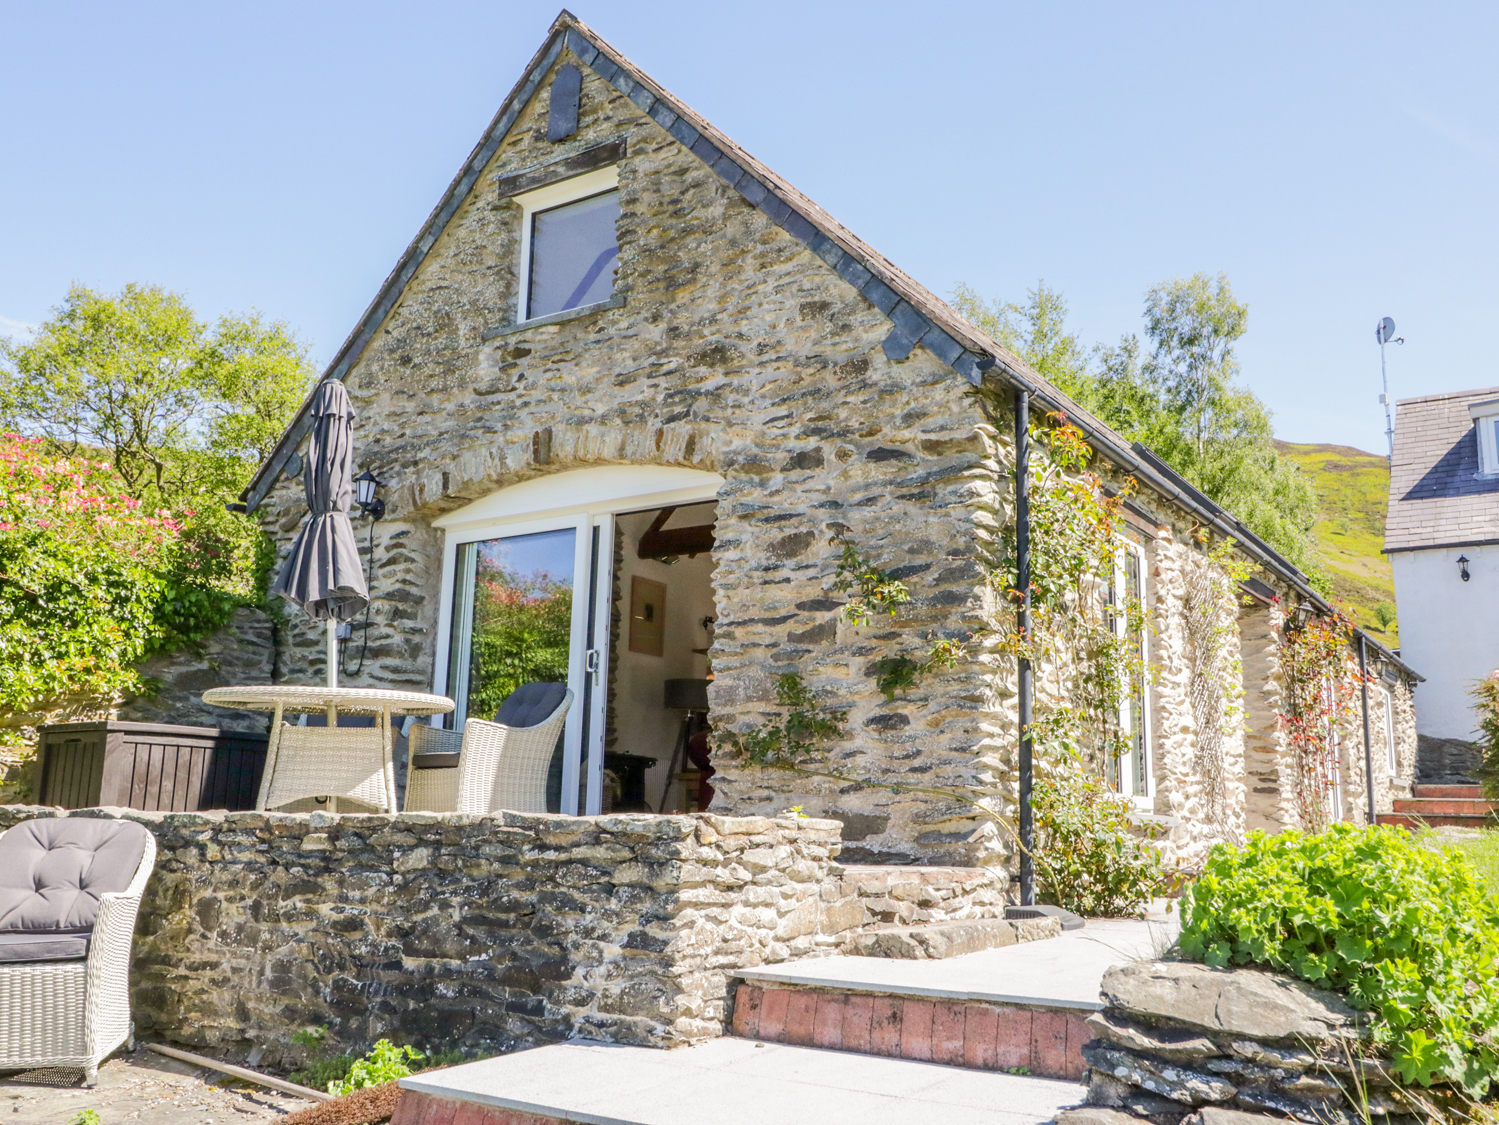 Dog Friendly Holiday Cottages In Snowdonia And North Wales Pet